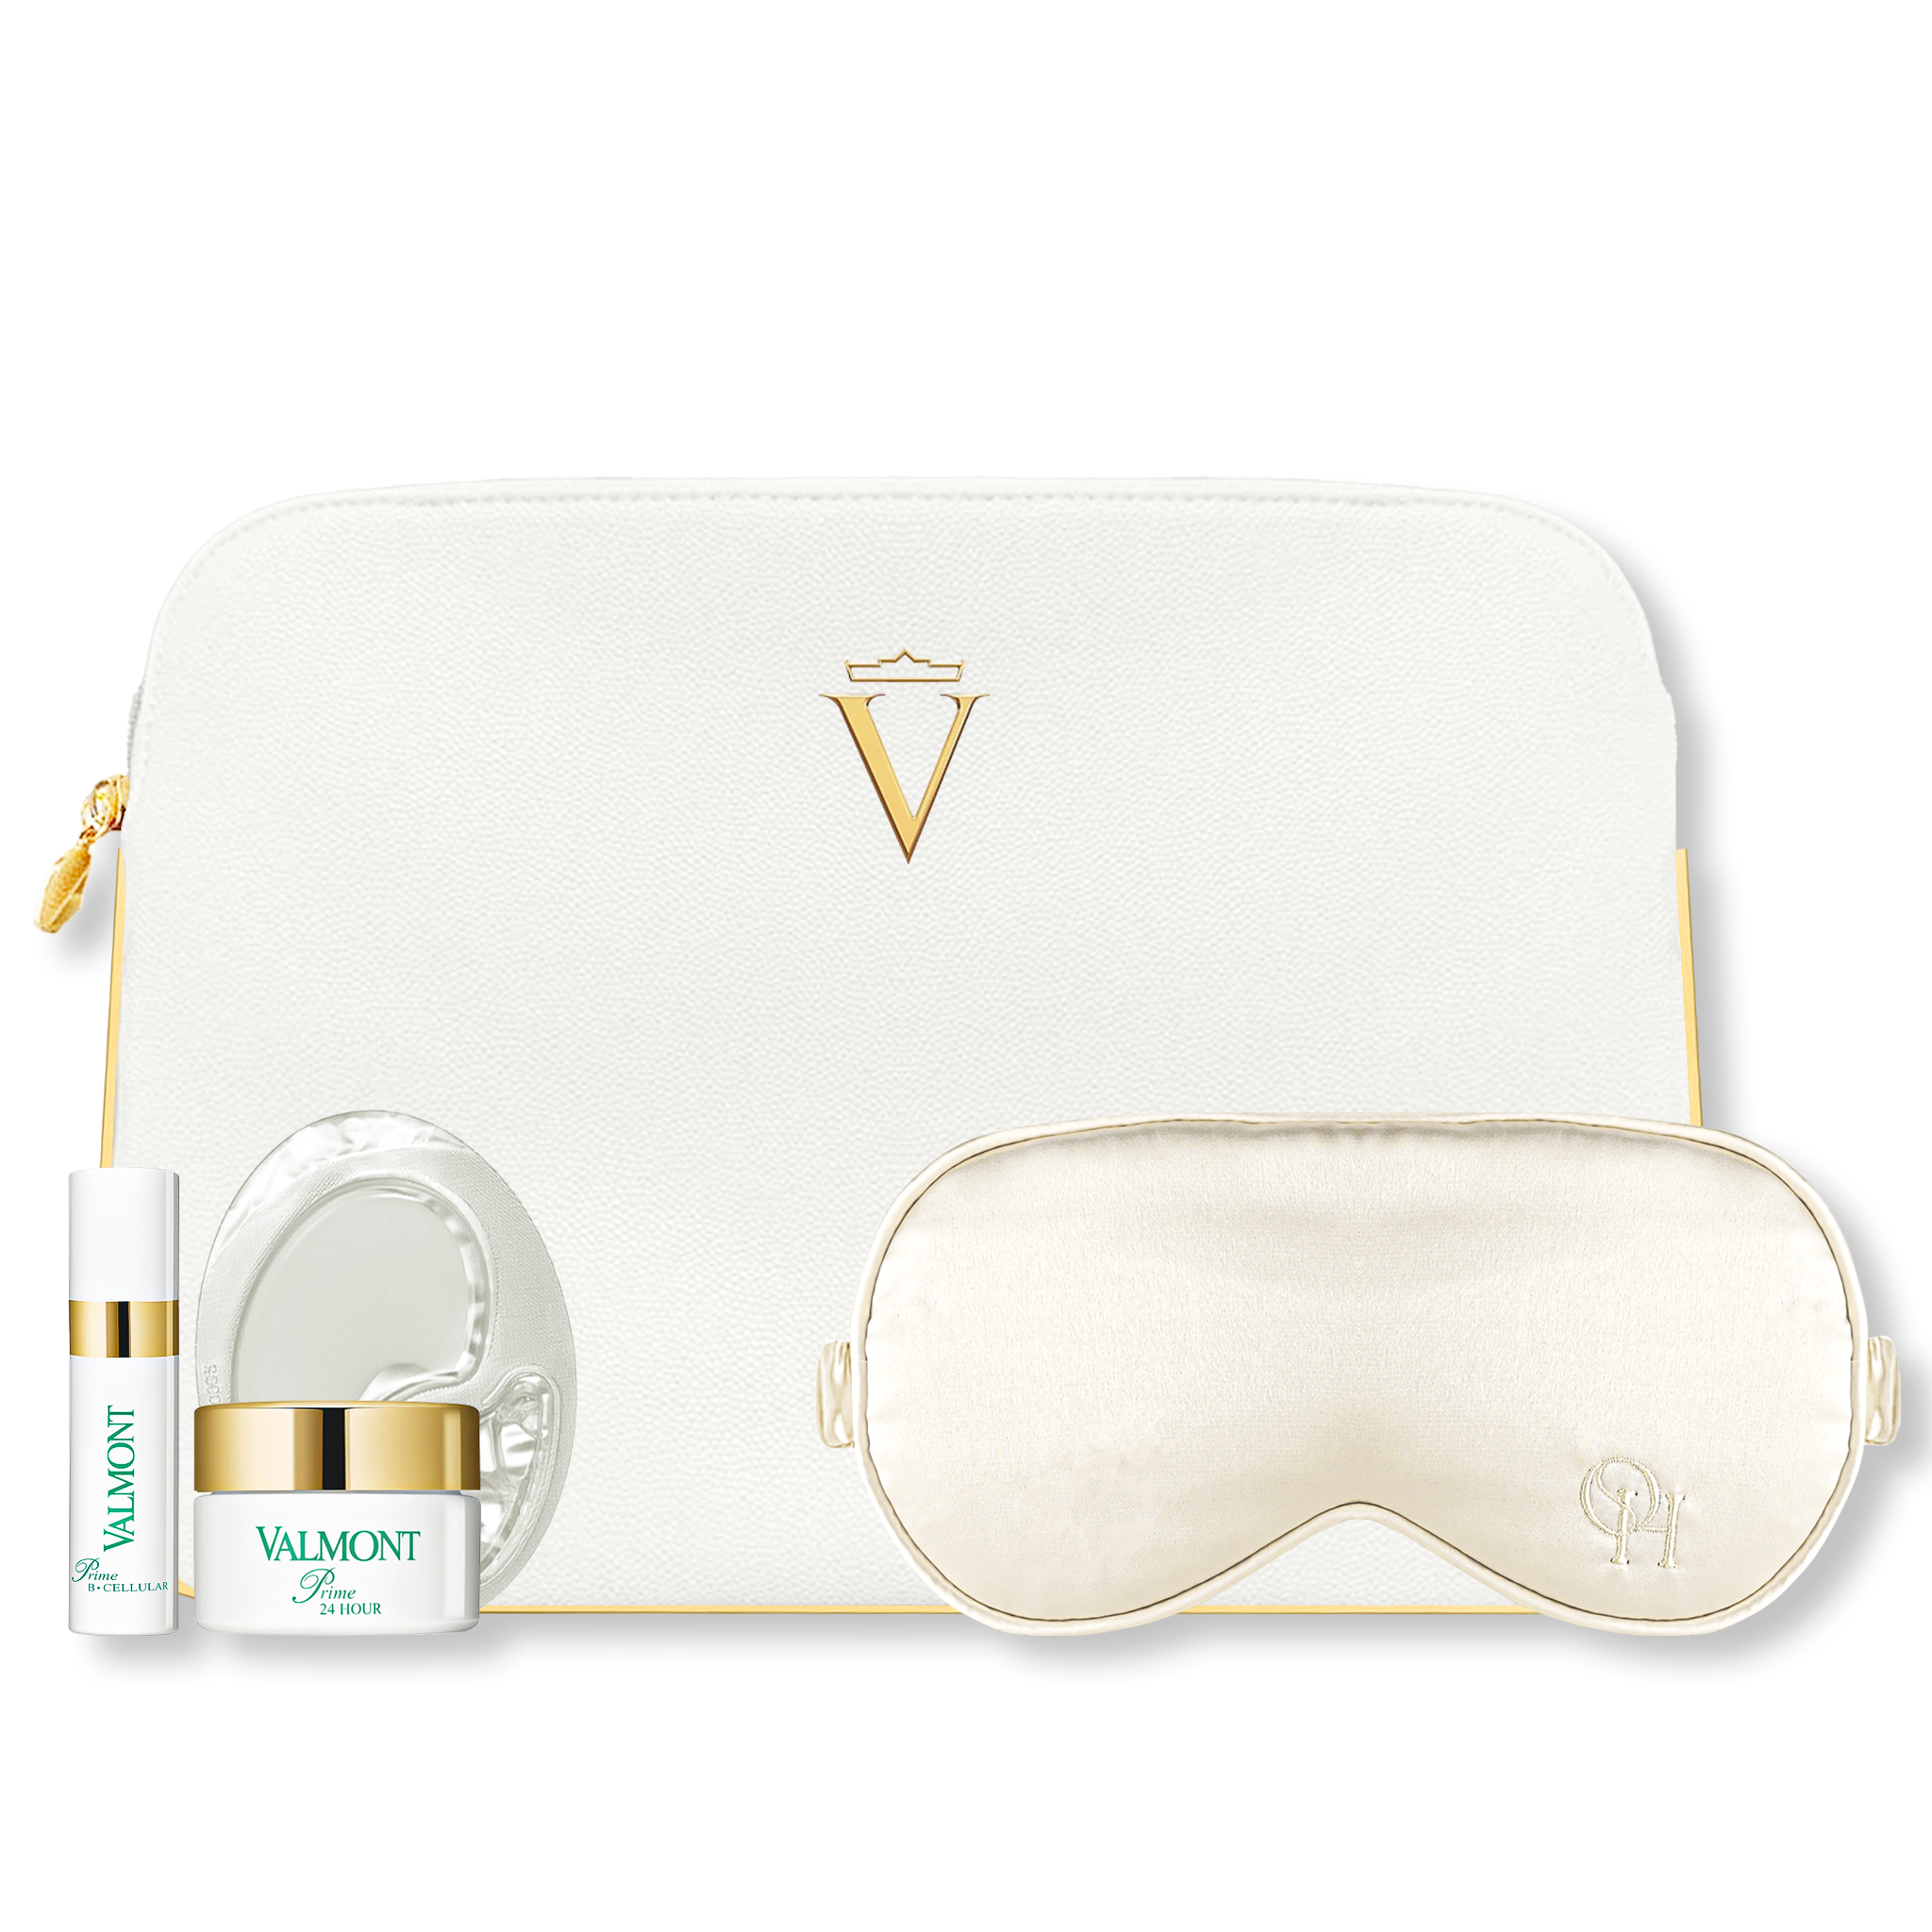 Valmont Deluxe Gift Set